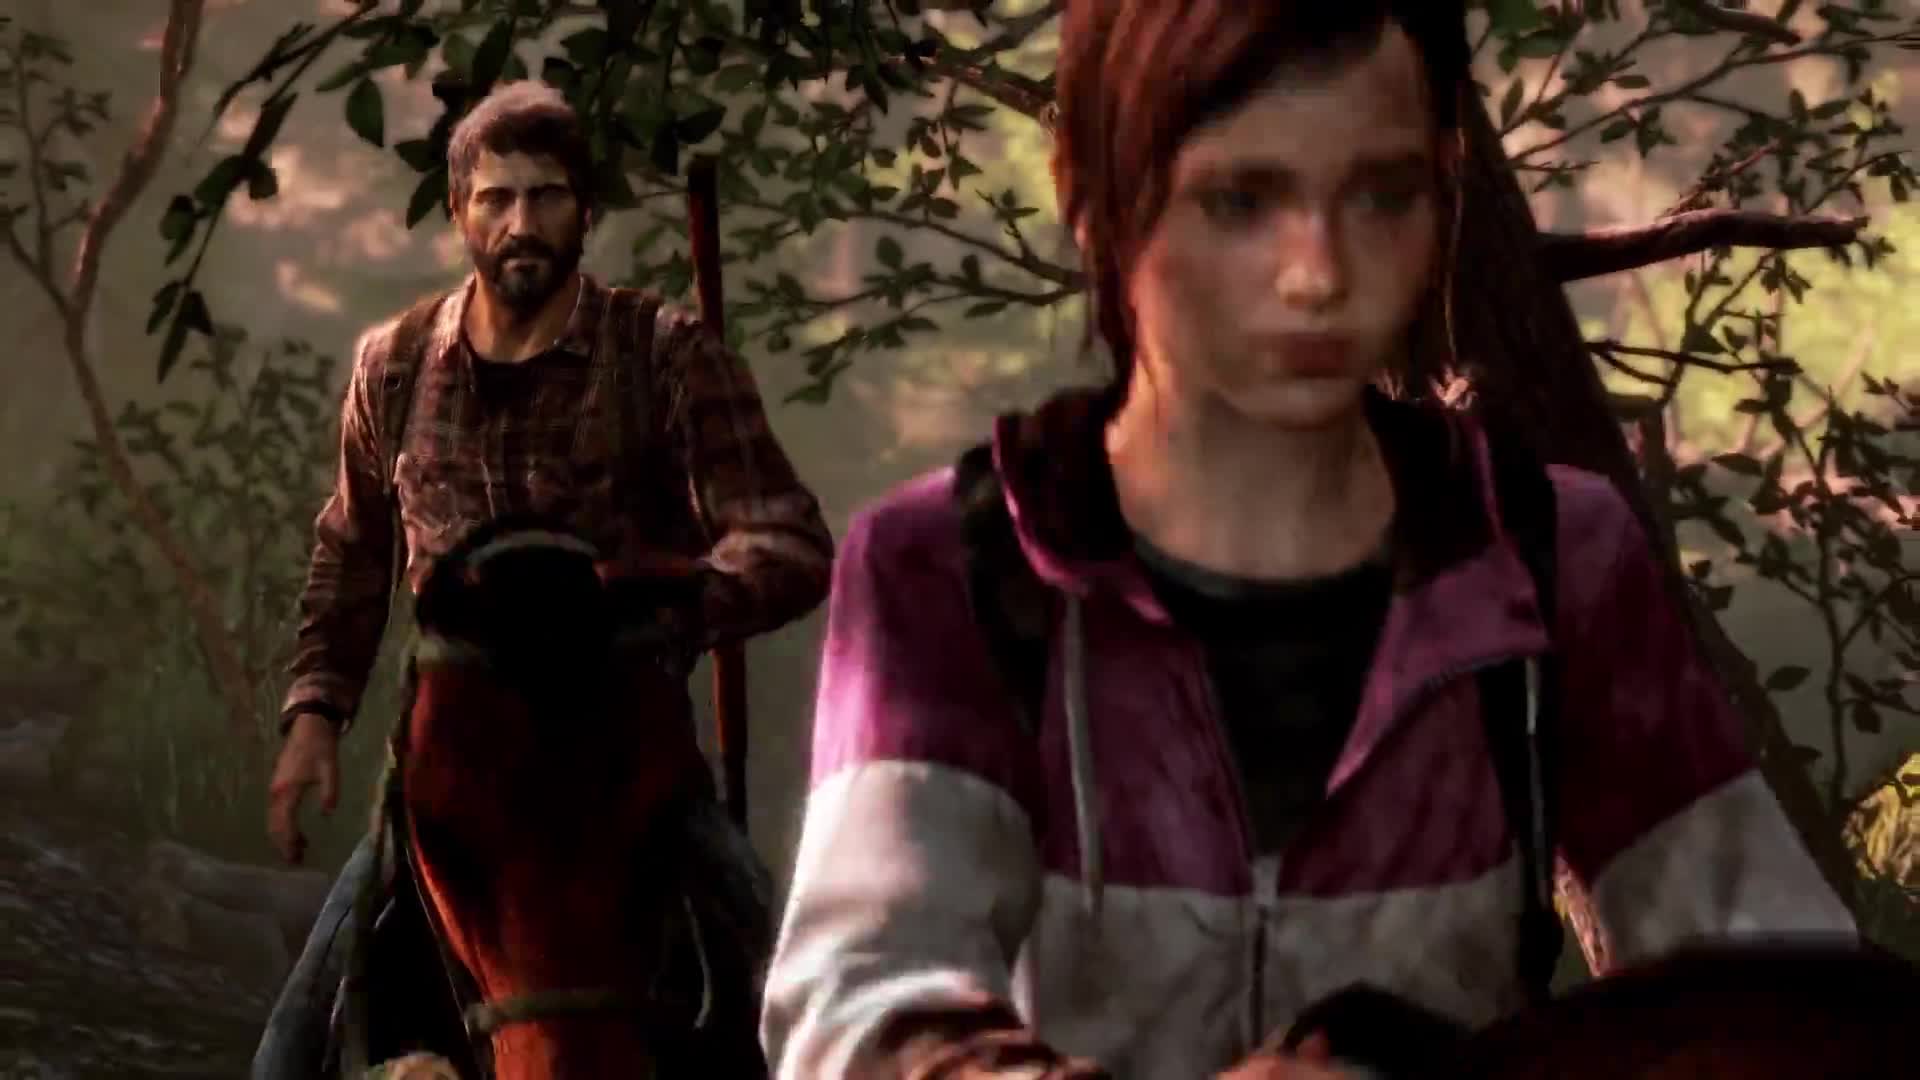 The Last of Us: Remastered - PS4 trailer